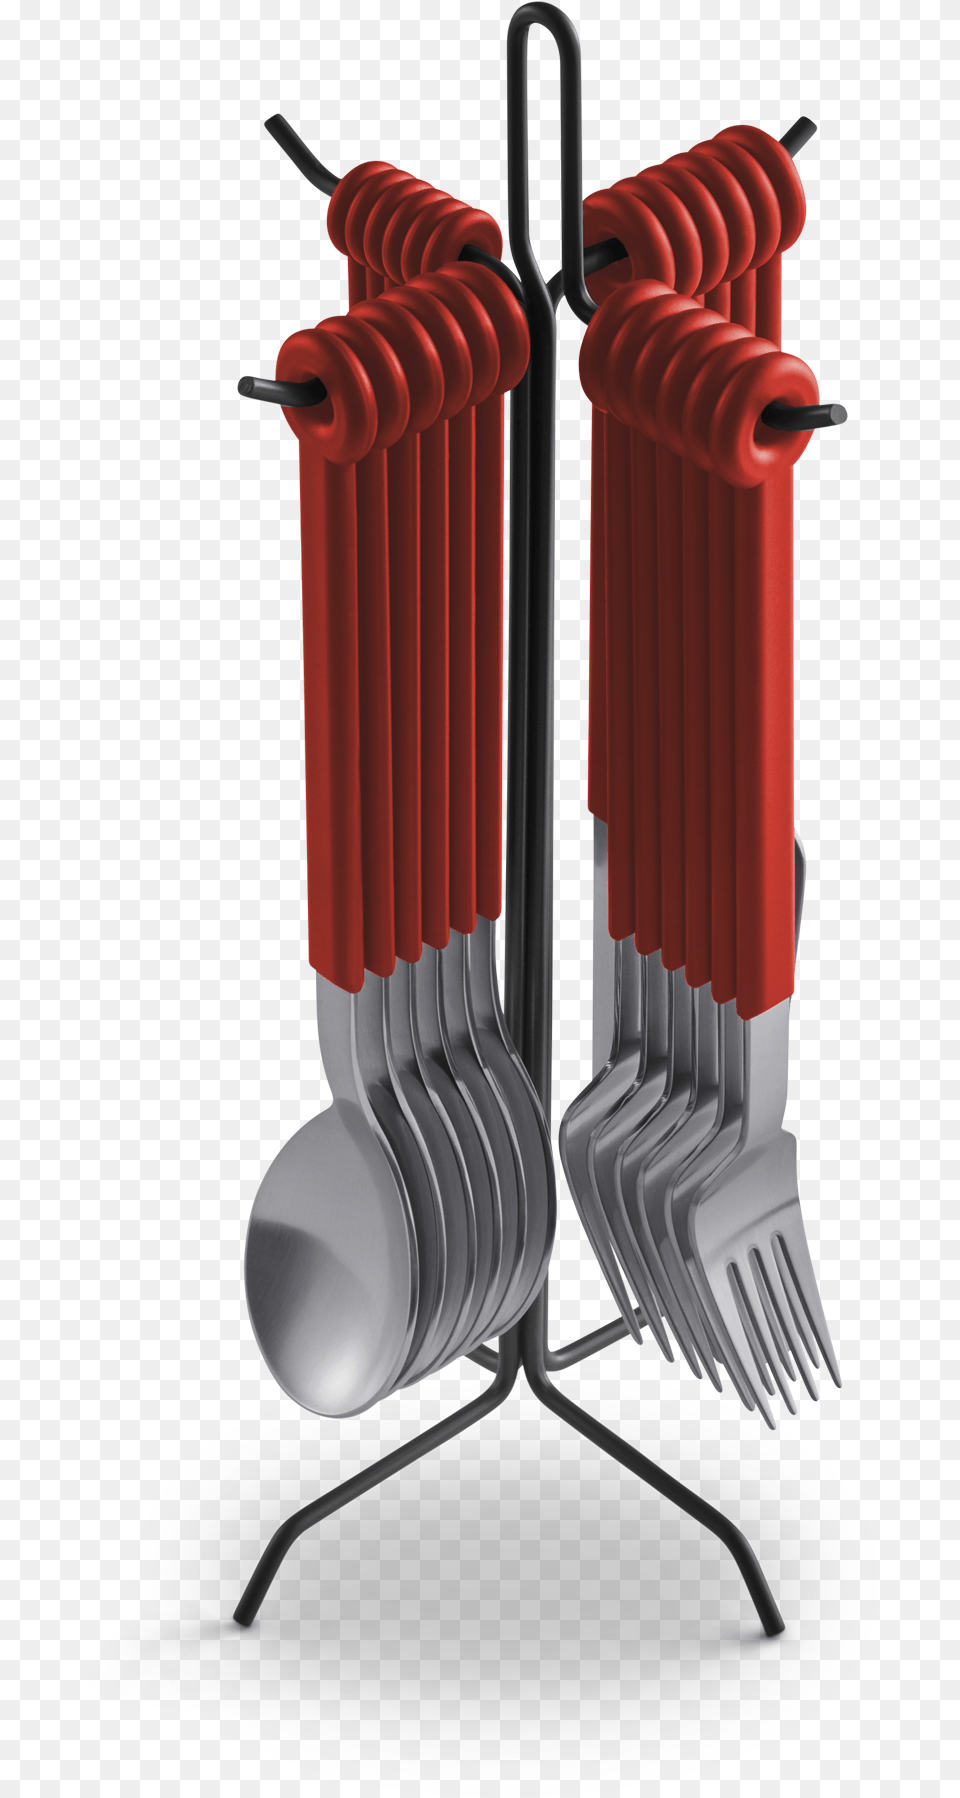 Mono Ring Flatware Set 24 Stand Red, Cutlery, Fork, Spoon Png Image